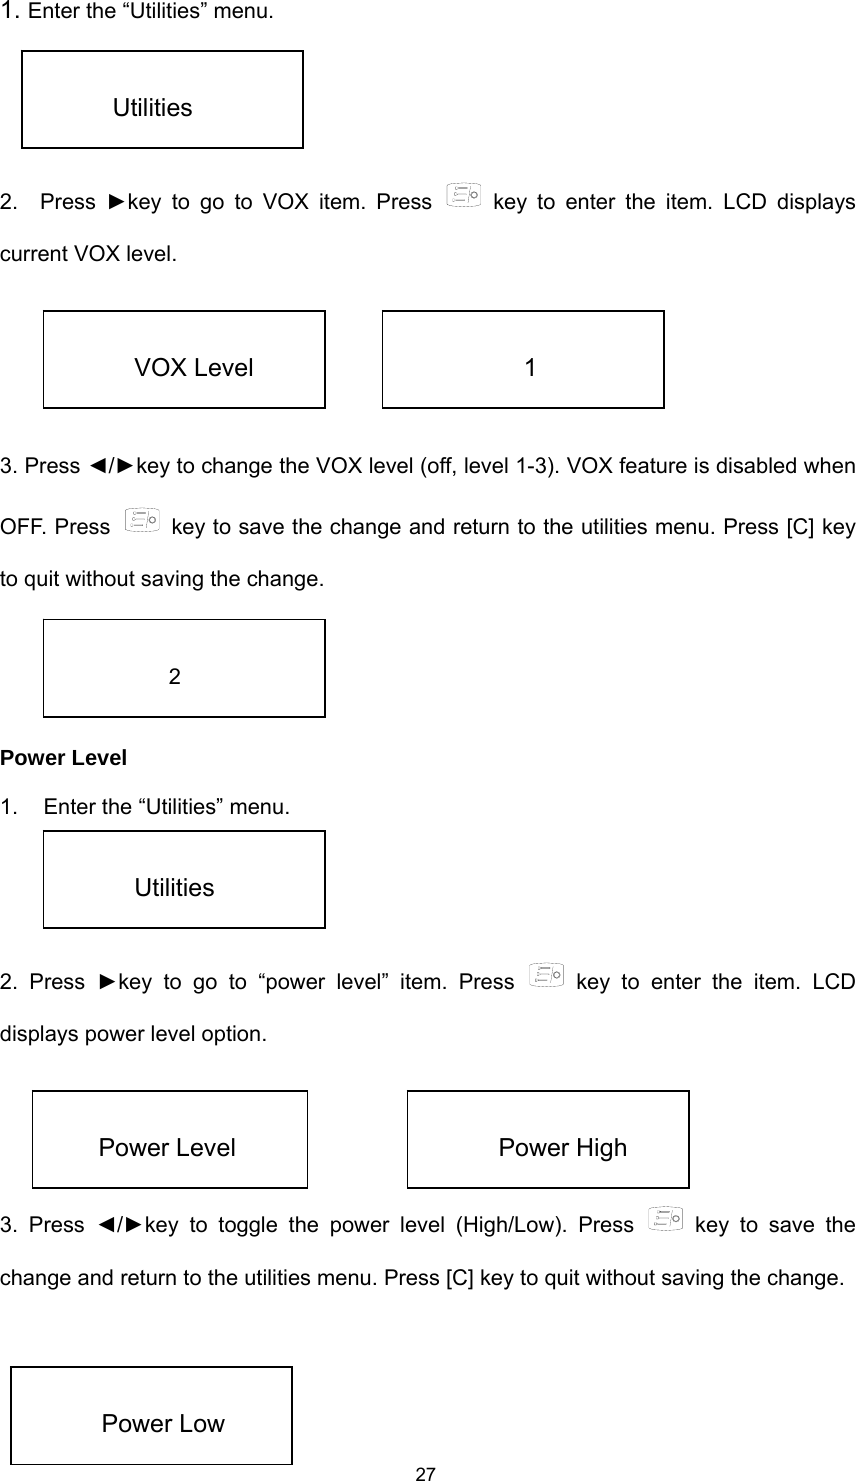  271. Enter the “Utilities” menu.   2.  Press ►key to go to VOX item. Press   key to enter the item. LCD displays current VOX level.      3. Press ◄/►key to change the VOX level (off, level 1-3). VOX feature is disabled when OFF. Press    key to save the change and return to the utilities menu. Press [C] key to quit without saving the change.     Power Level 1.  Enter the “Utilities” menu.   2. Press ►key to go to “power level” item. Press   key to enter the item. LCD displays power level option.     3. Press ◄/►key to toggle the power level (High/Low). Press   key to save the change and return to the utilities menu. Press [C] key to quit without saving the change.      Utilities  VOX Level  1  2  Utilities  Power Level  Power High  Power Low 